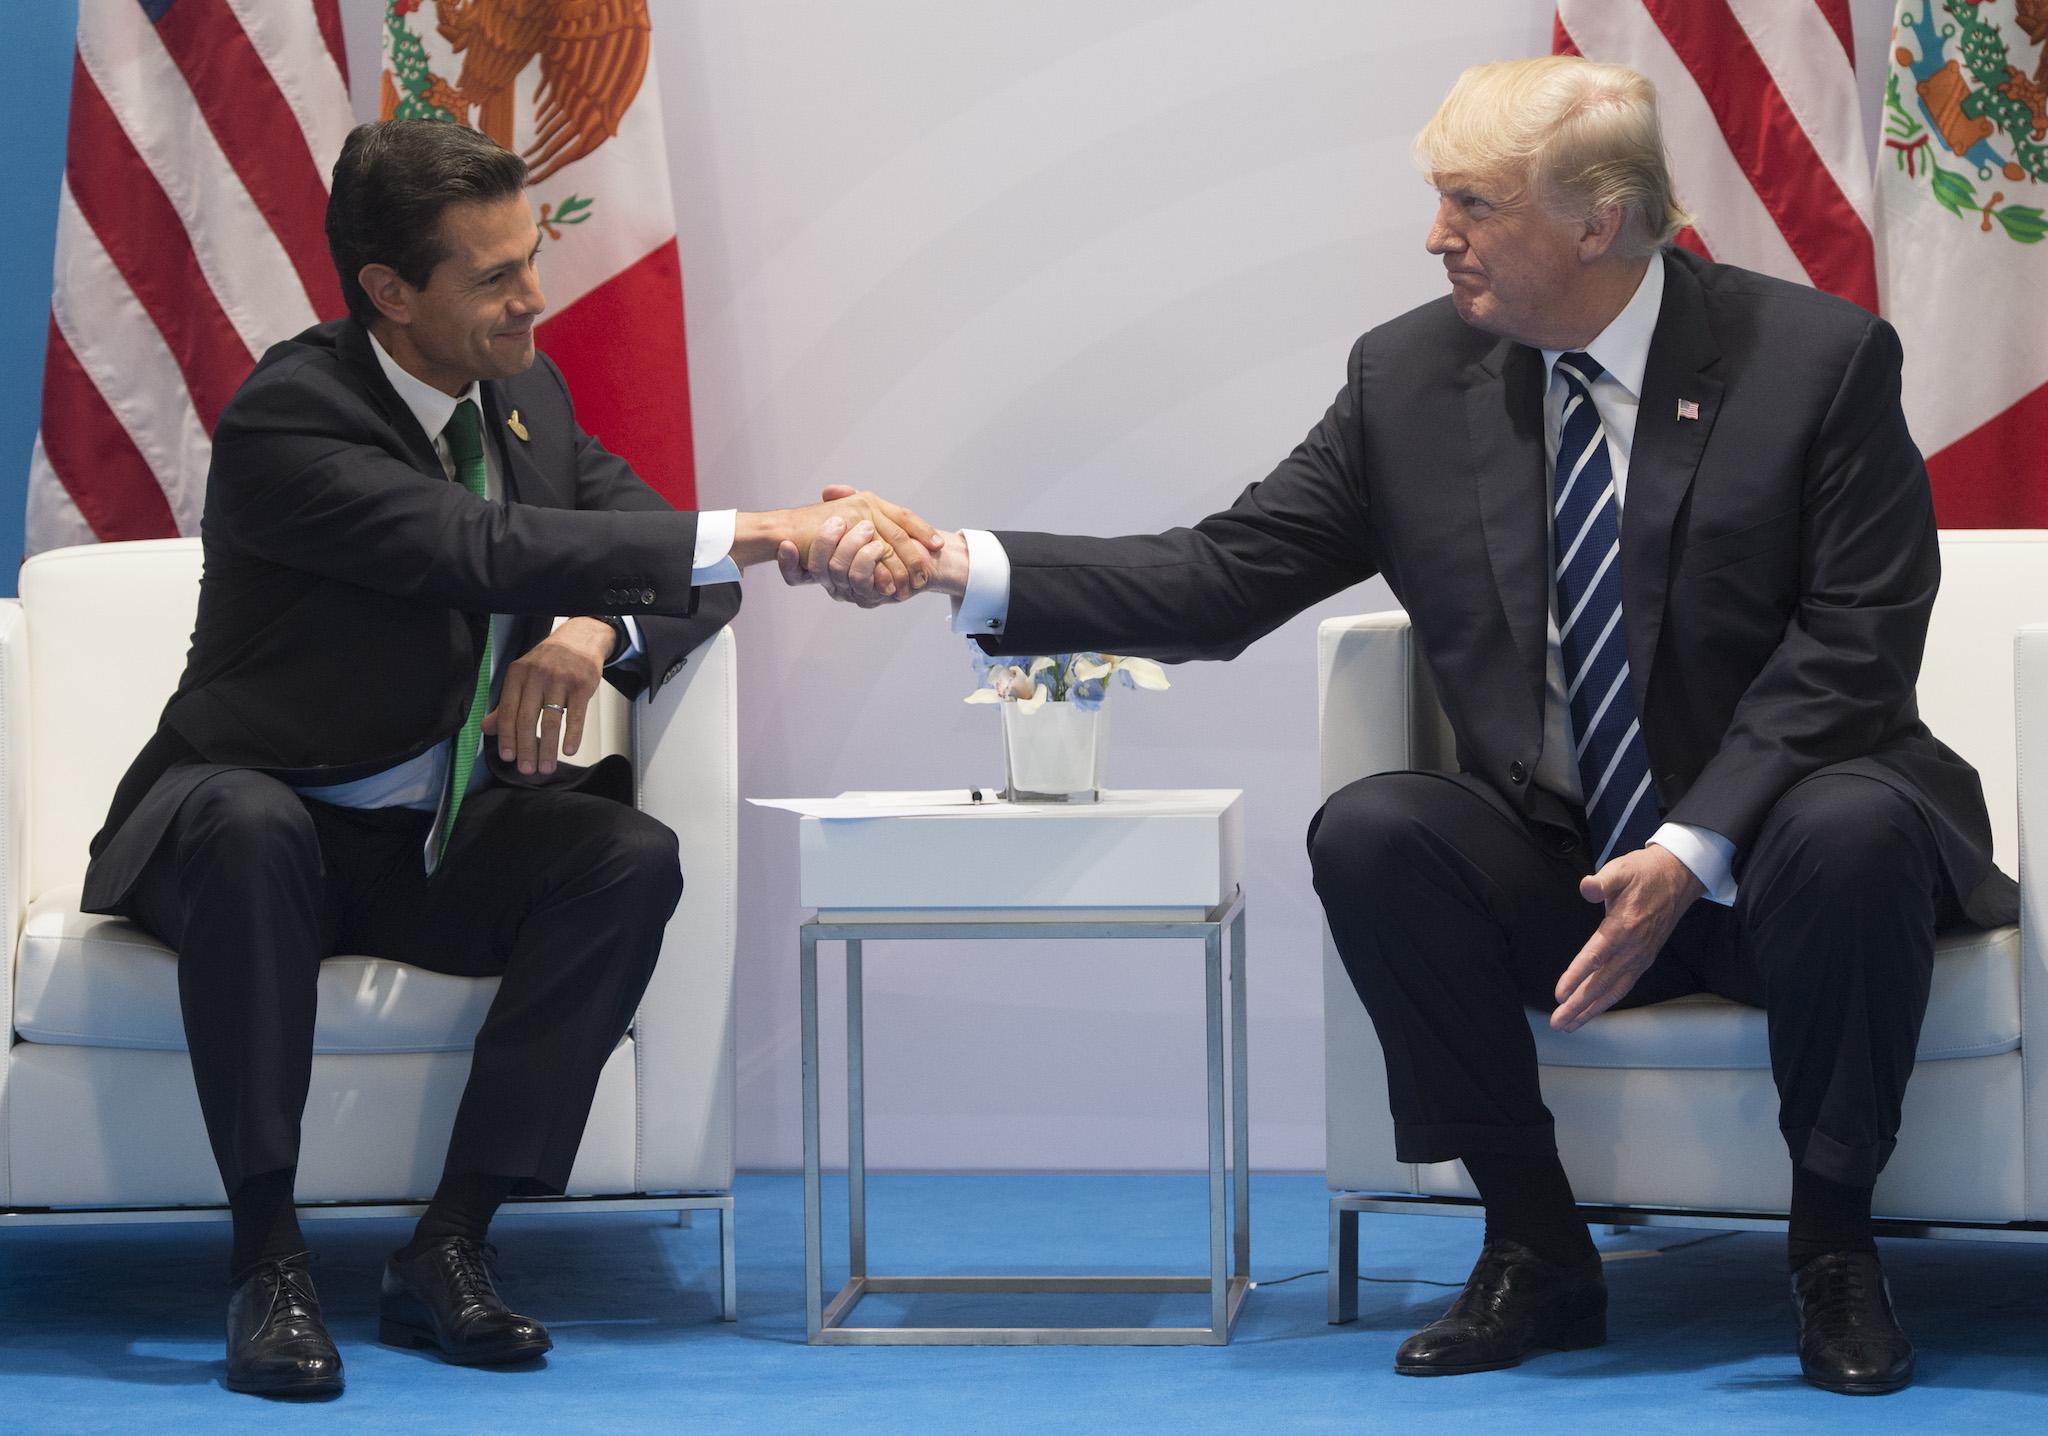 US President Donald Trump and Mexican President Enrique Pena Nieto shake hands during a meeting on the sidelines of the G20 Summit in Hamburg, Germany